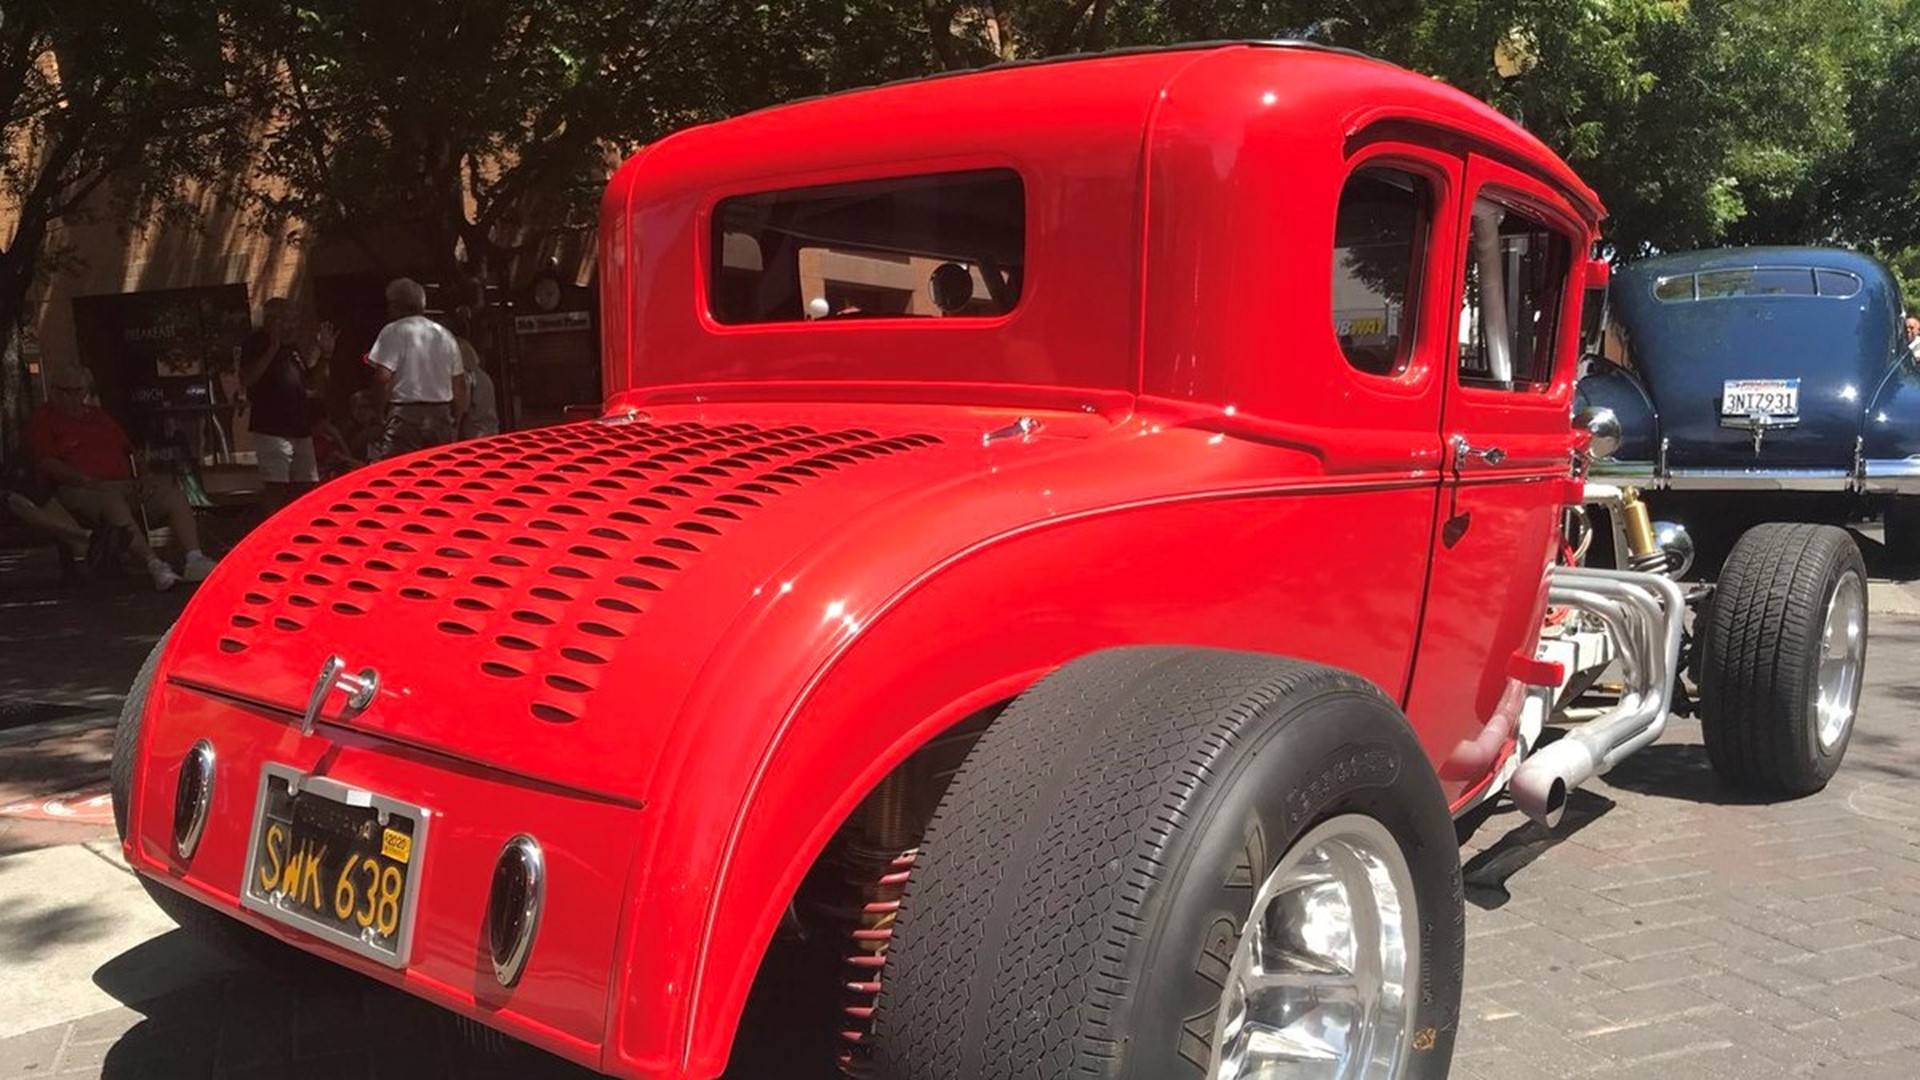 Cruising the streets of downtown Modesto is what locals say inspired George Lucas to write the famous film "American Graffiti."